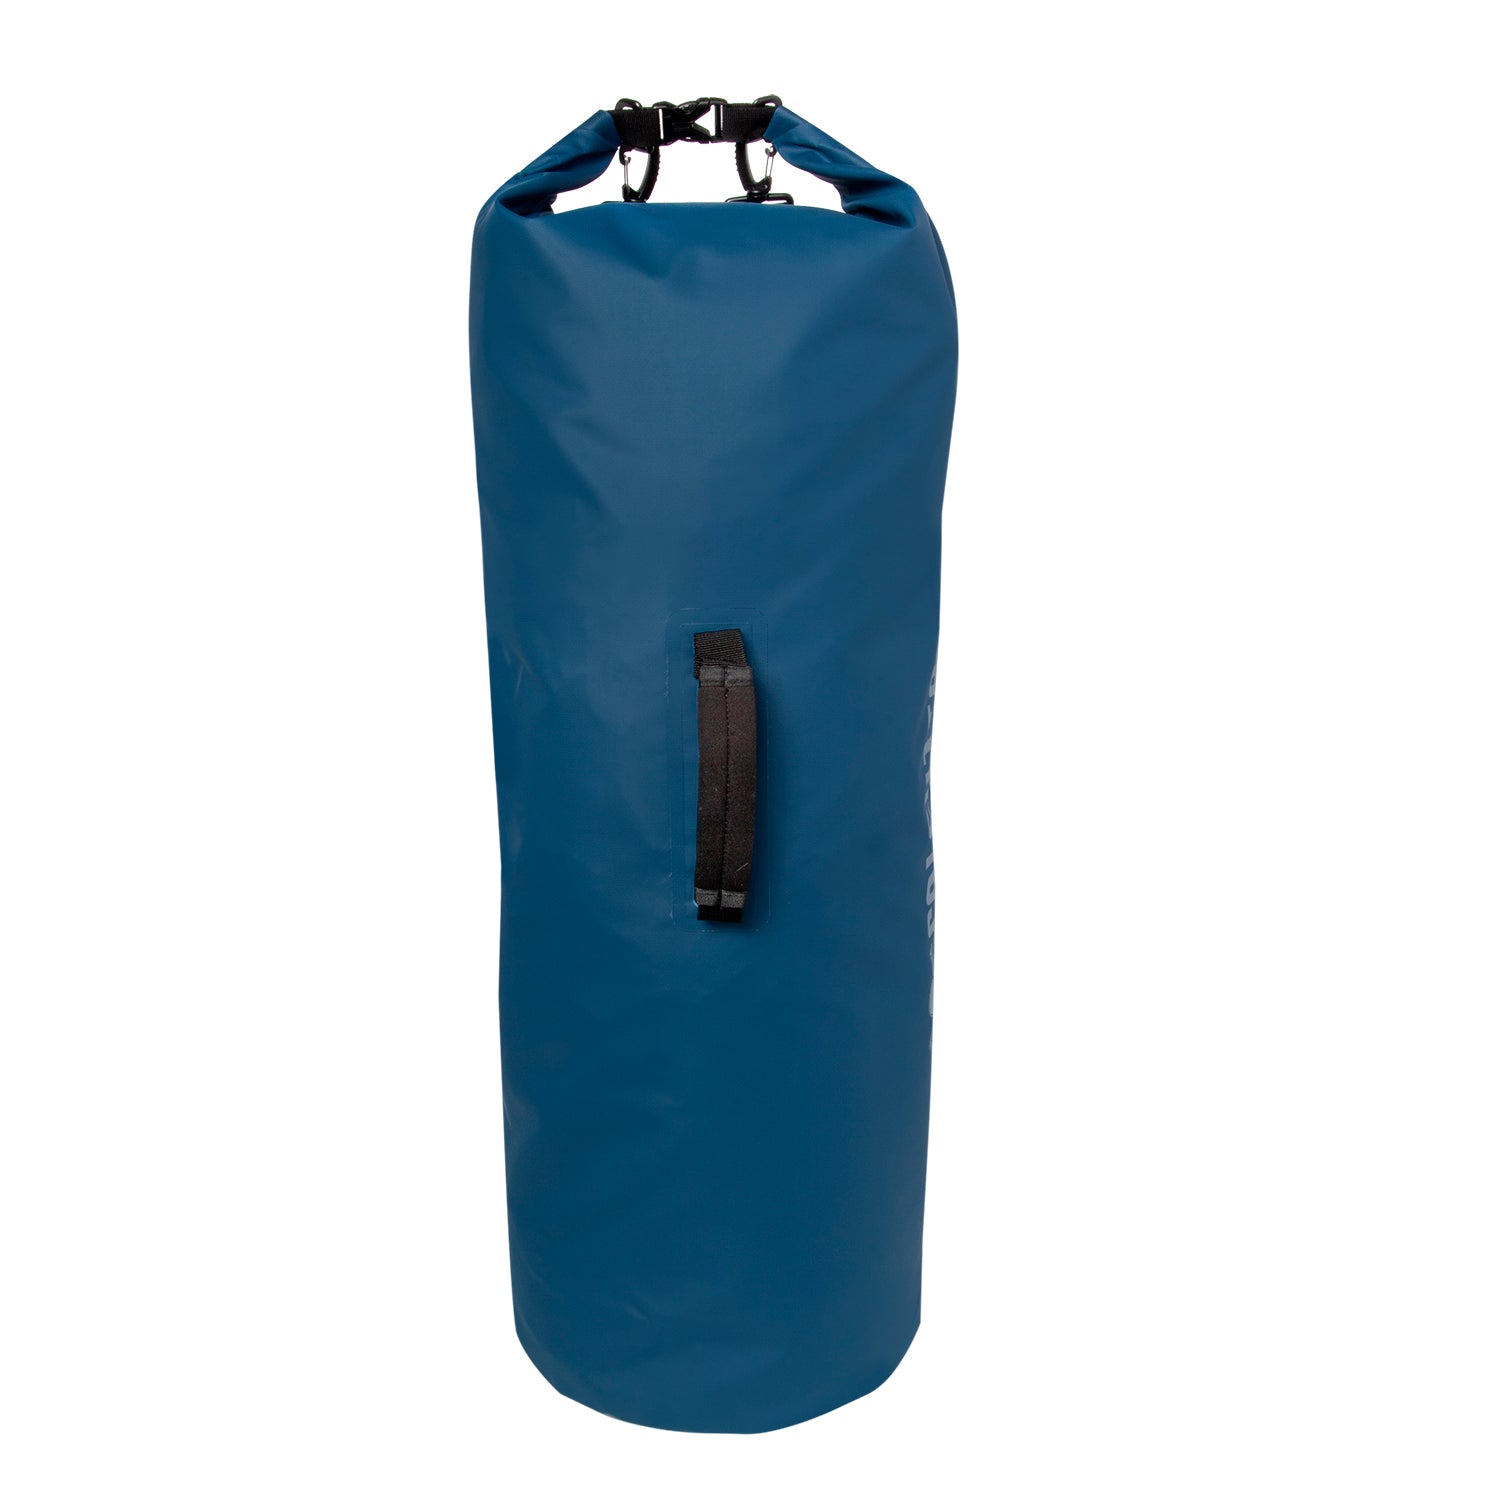 Calcutta dry bag 60L blue side with carry handle